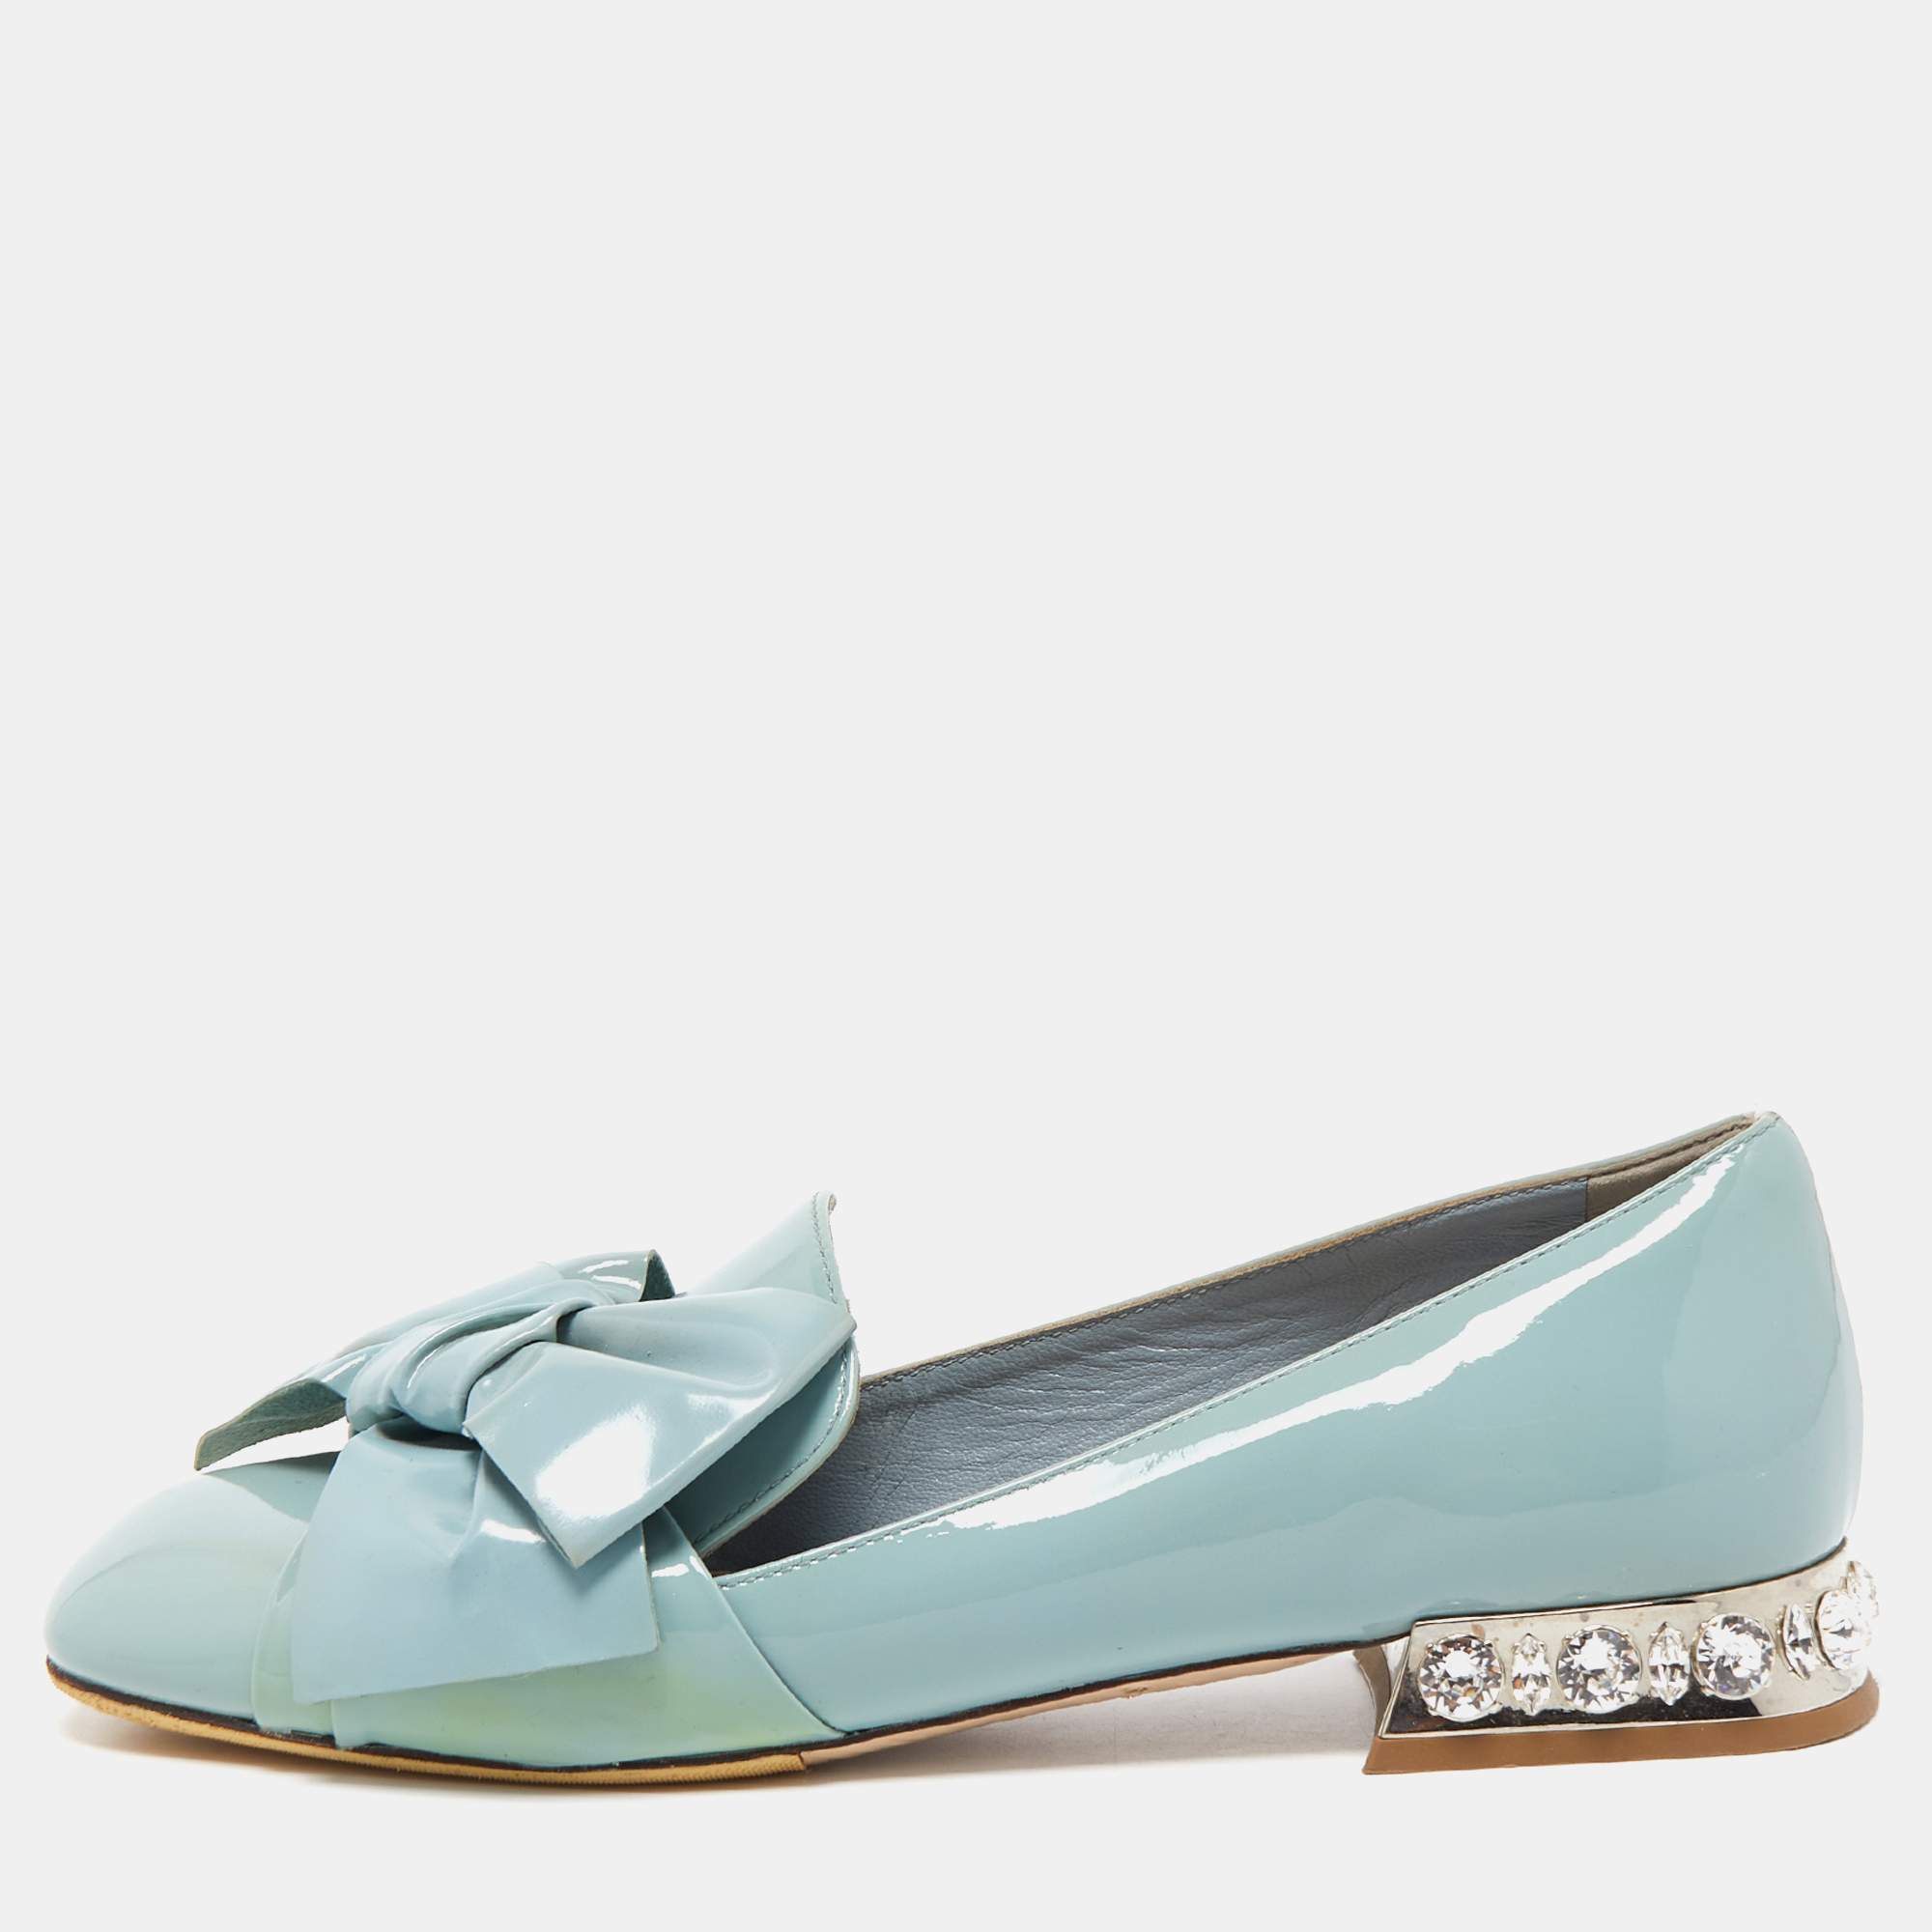 

Miu Miu Blue Patent Leather Crystal Embellished Bow Smoking Slippers Size